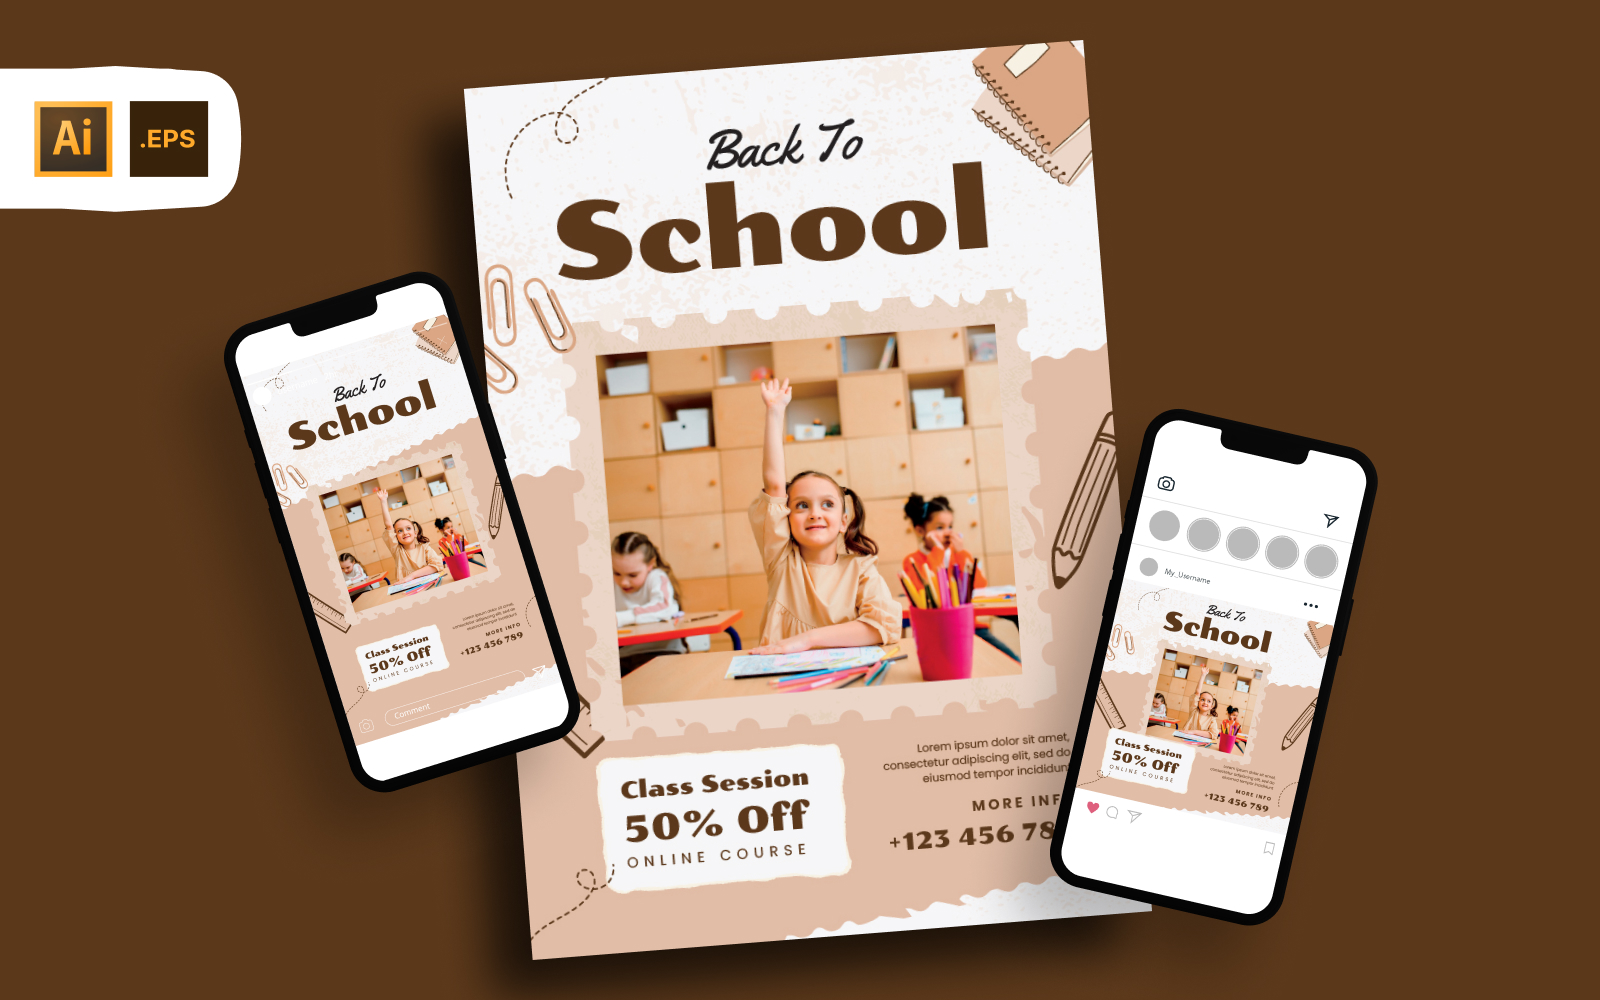 Online Course Discount Promotion Flyer Template